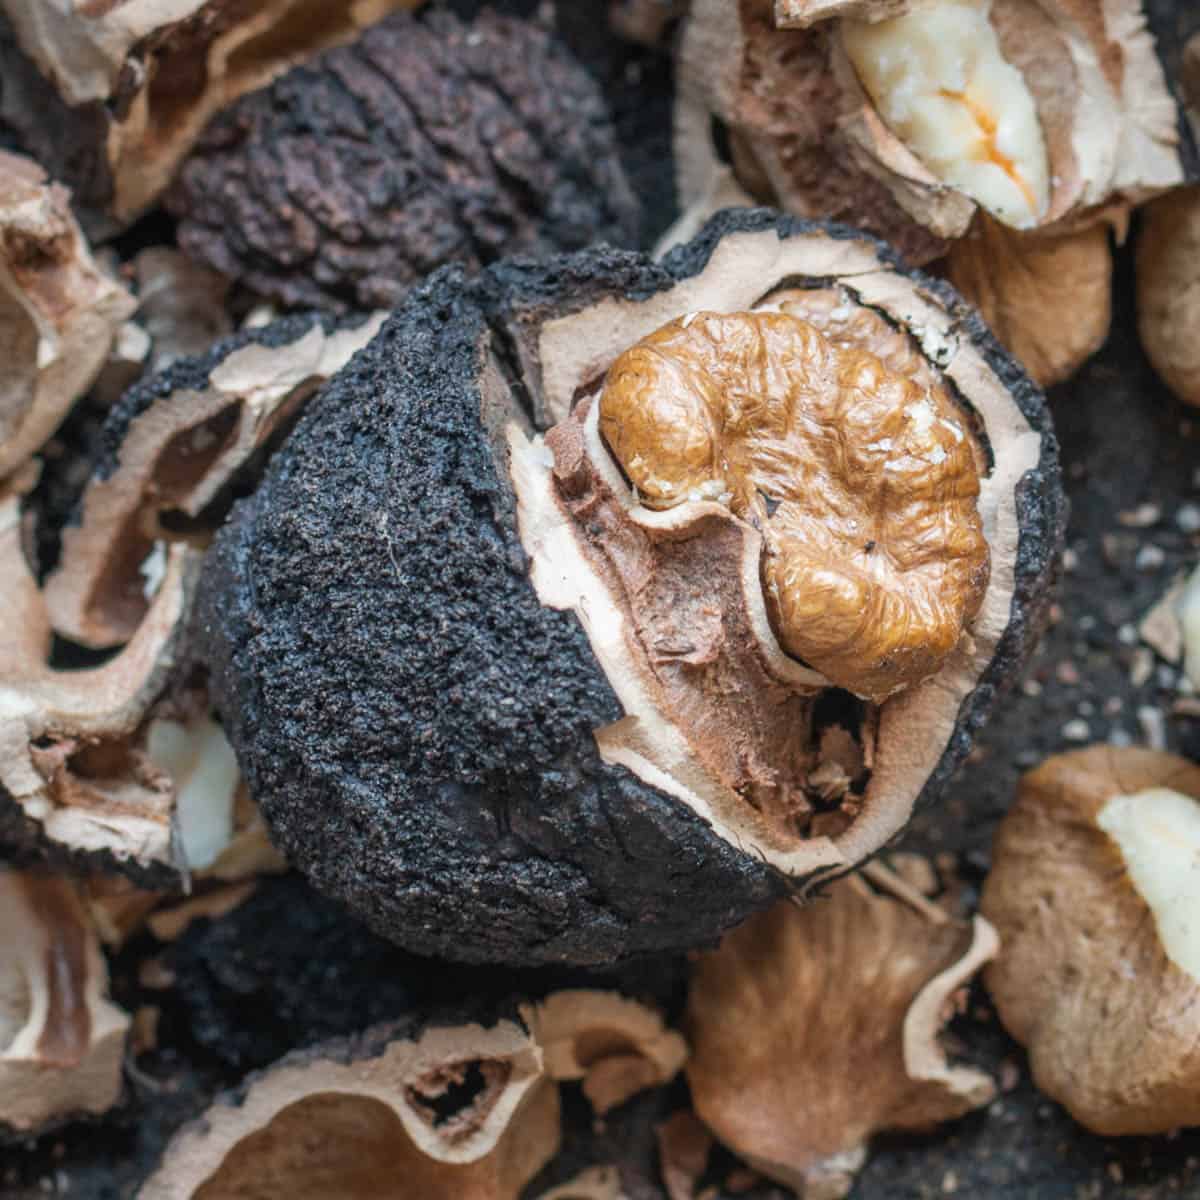 How To Crack Black Walnuts Without A Nutcracker Black Walnuts: Harvesting, Cracking and Uses - Forager | Chef